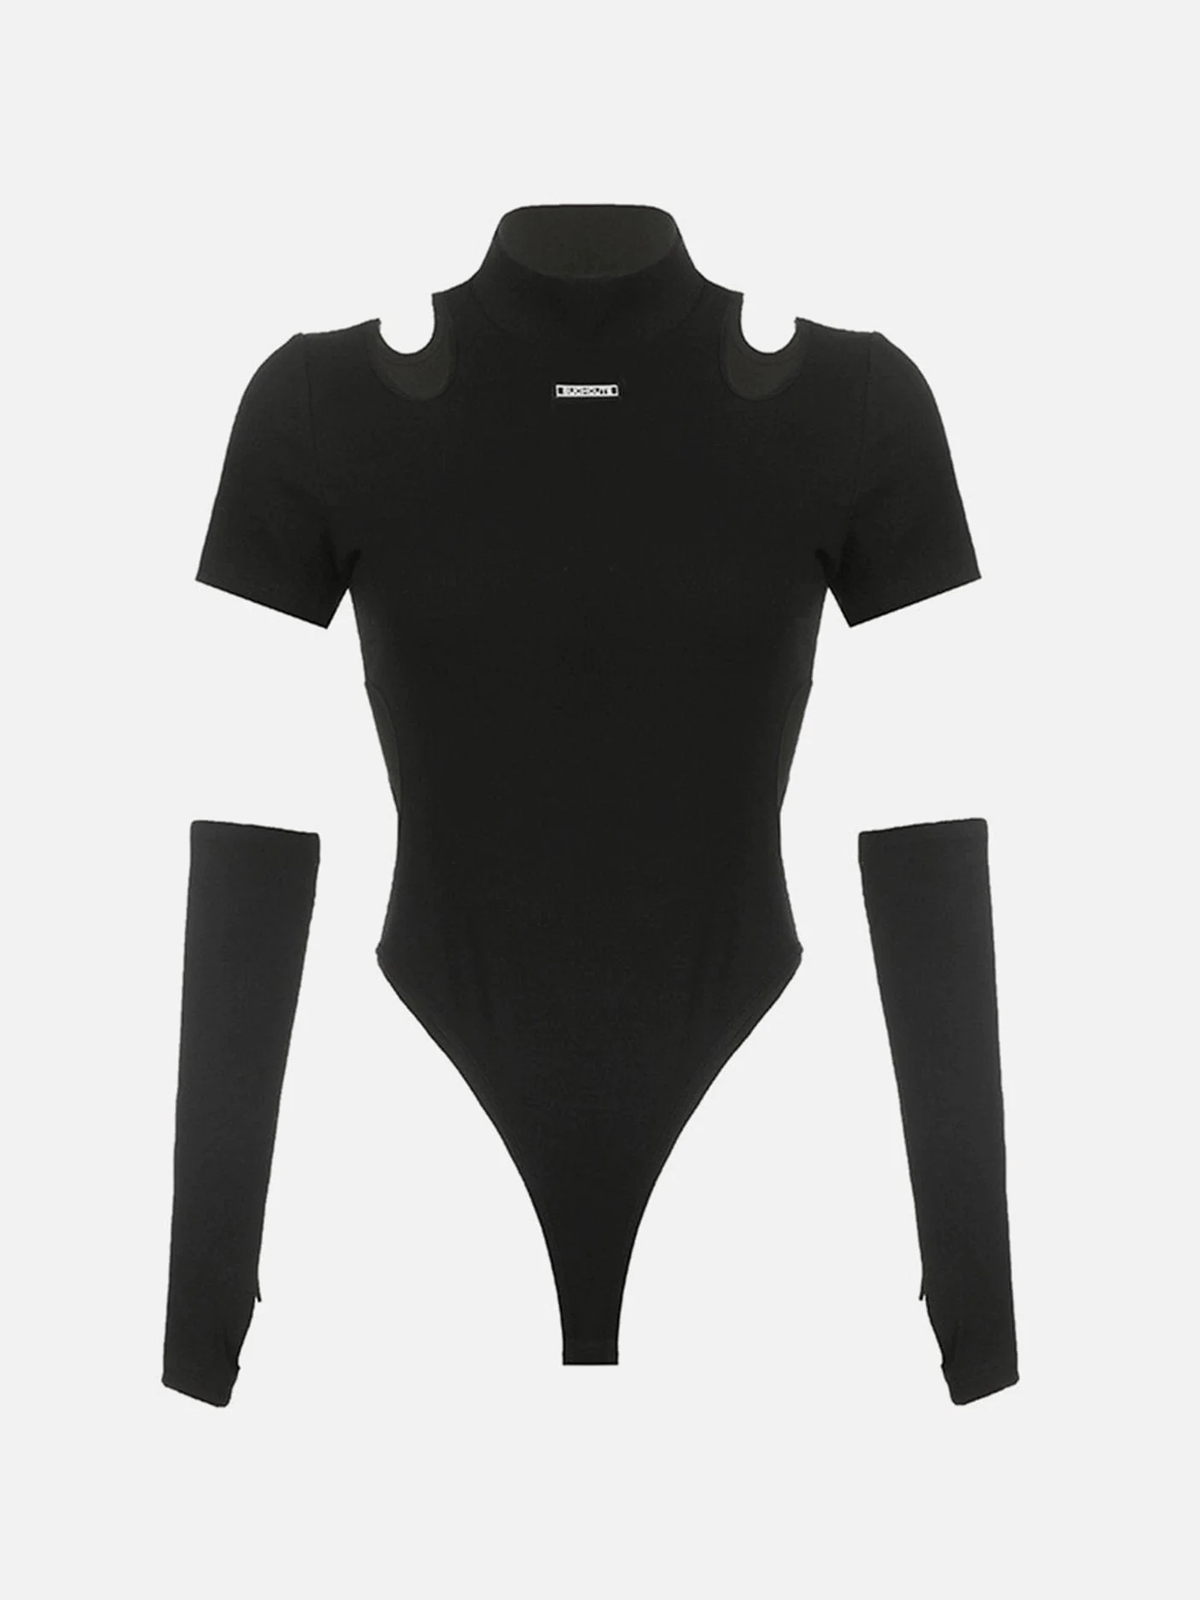 TO Hollow Cuff Out Bodysuit